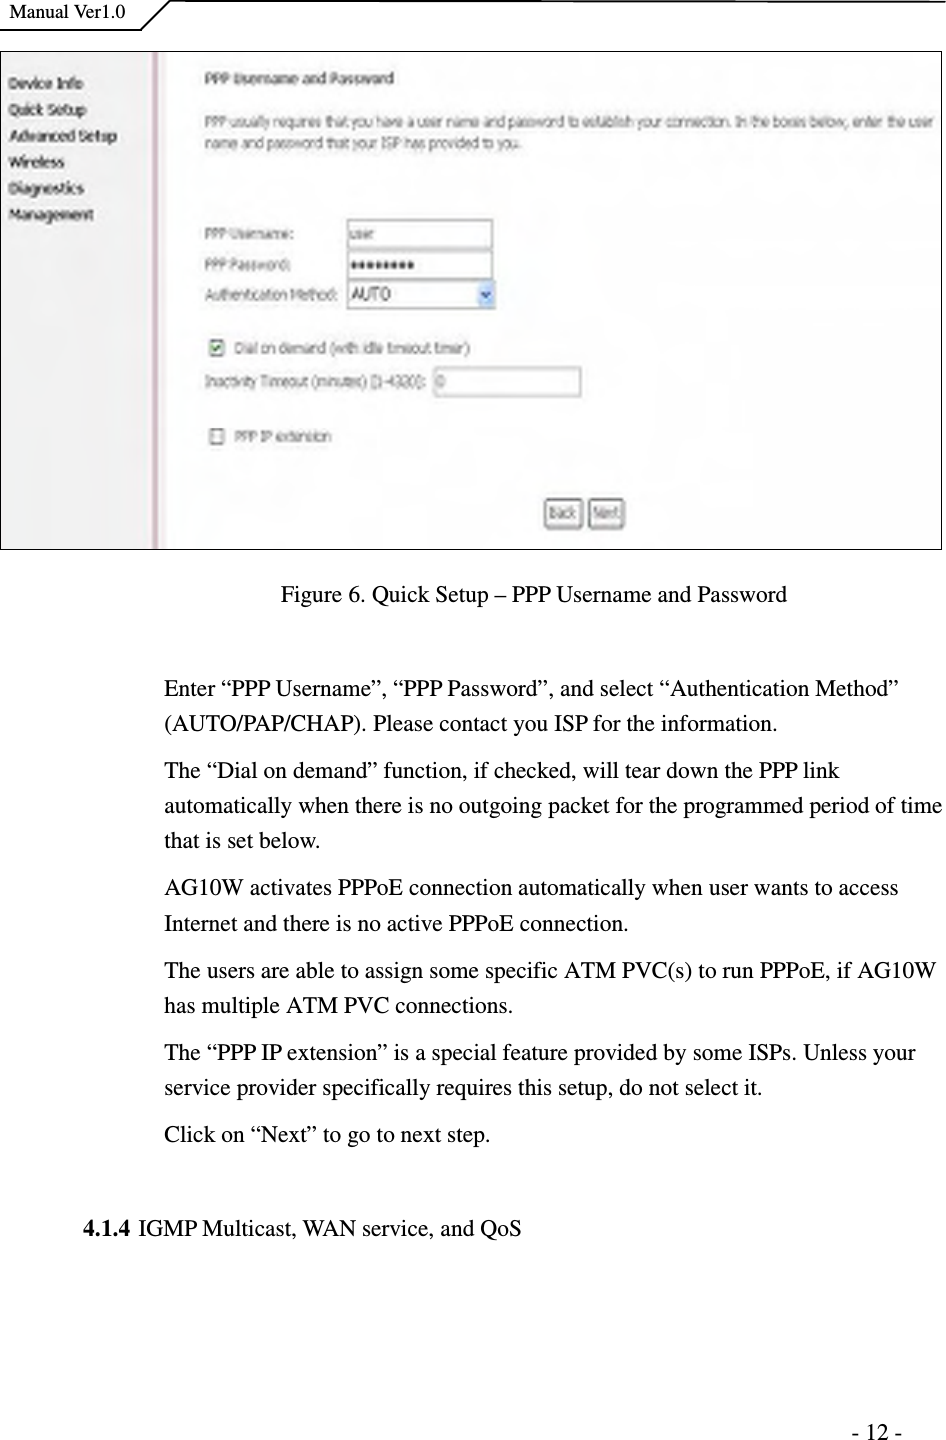    Manual Ver1.0                                                                      - 12 -  Figure 6. Quick Setup – PPP Username and Password  Enter “PPP Username”, “PPP Password”, and select “Authentication Method” (AUTO/PAP/CHAP). Please contact you ISP for the information.   The “Dial on demand” function, if checked, will tear down the PPP link automatically when there is no outgoing packet for the programmed period of time that is set below.   AG10W activates PPPoE connection automatically when user wants to access Internet and there is no active PPPoE connection.   The users are able to assign some specific ATM PVC(s) to run PPPoE, if AG10W has multiple ATM PVC connections.   The “PPP IP extension” is a special feature provided by some ISPs. Unless your service provider specifically requires this setup, do not select it. Click on “Next” to go to next step.  4.1.4 IGMP Multicast, WAN service, and QoS 